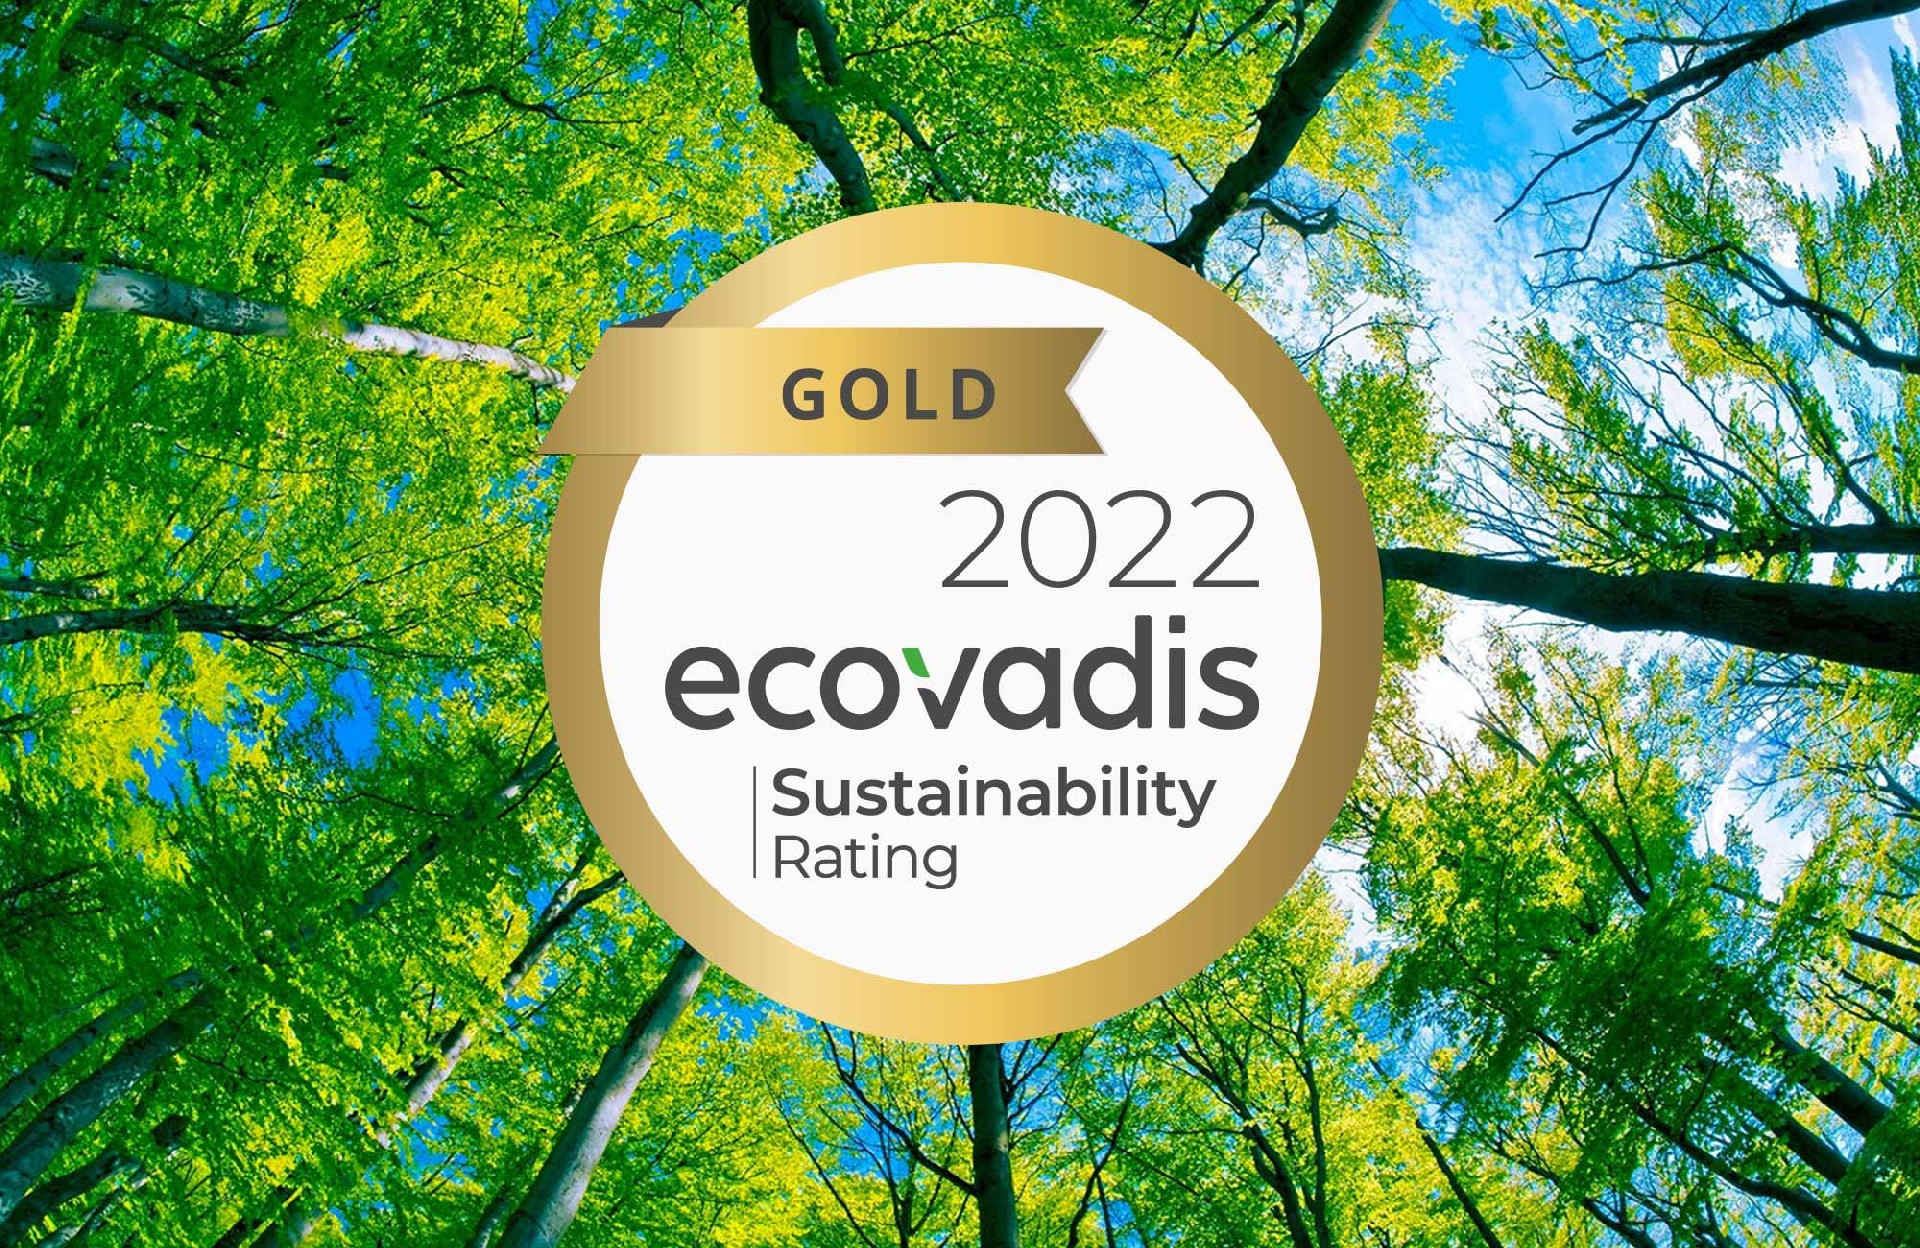 Ecovadis gold label inserted in forest background